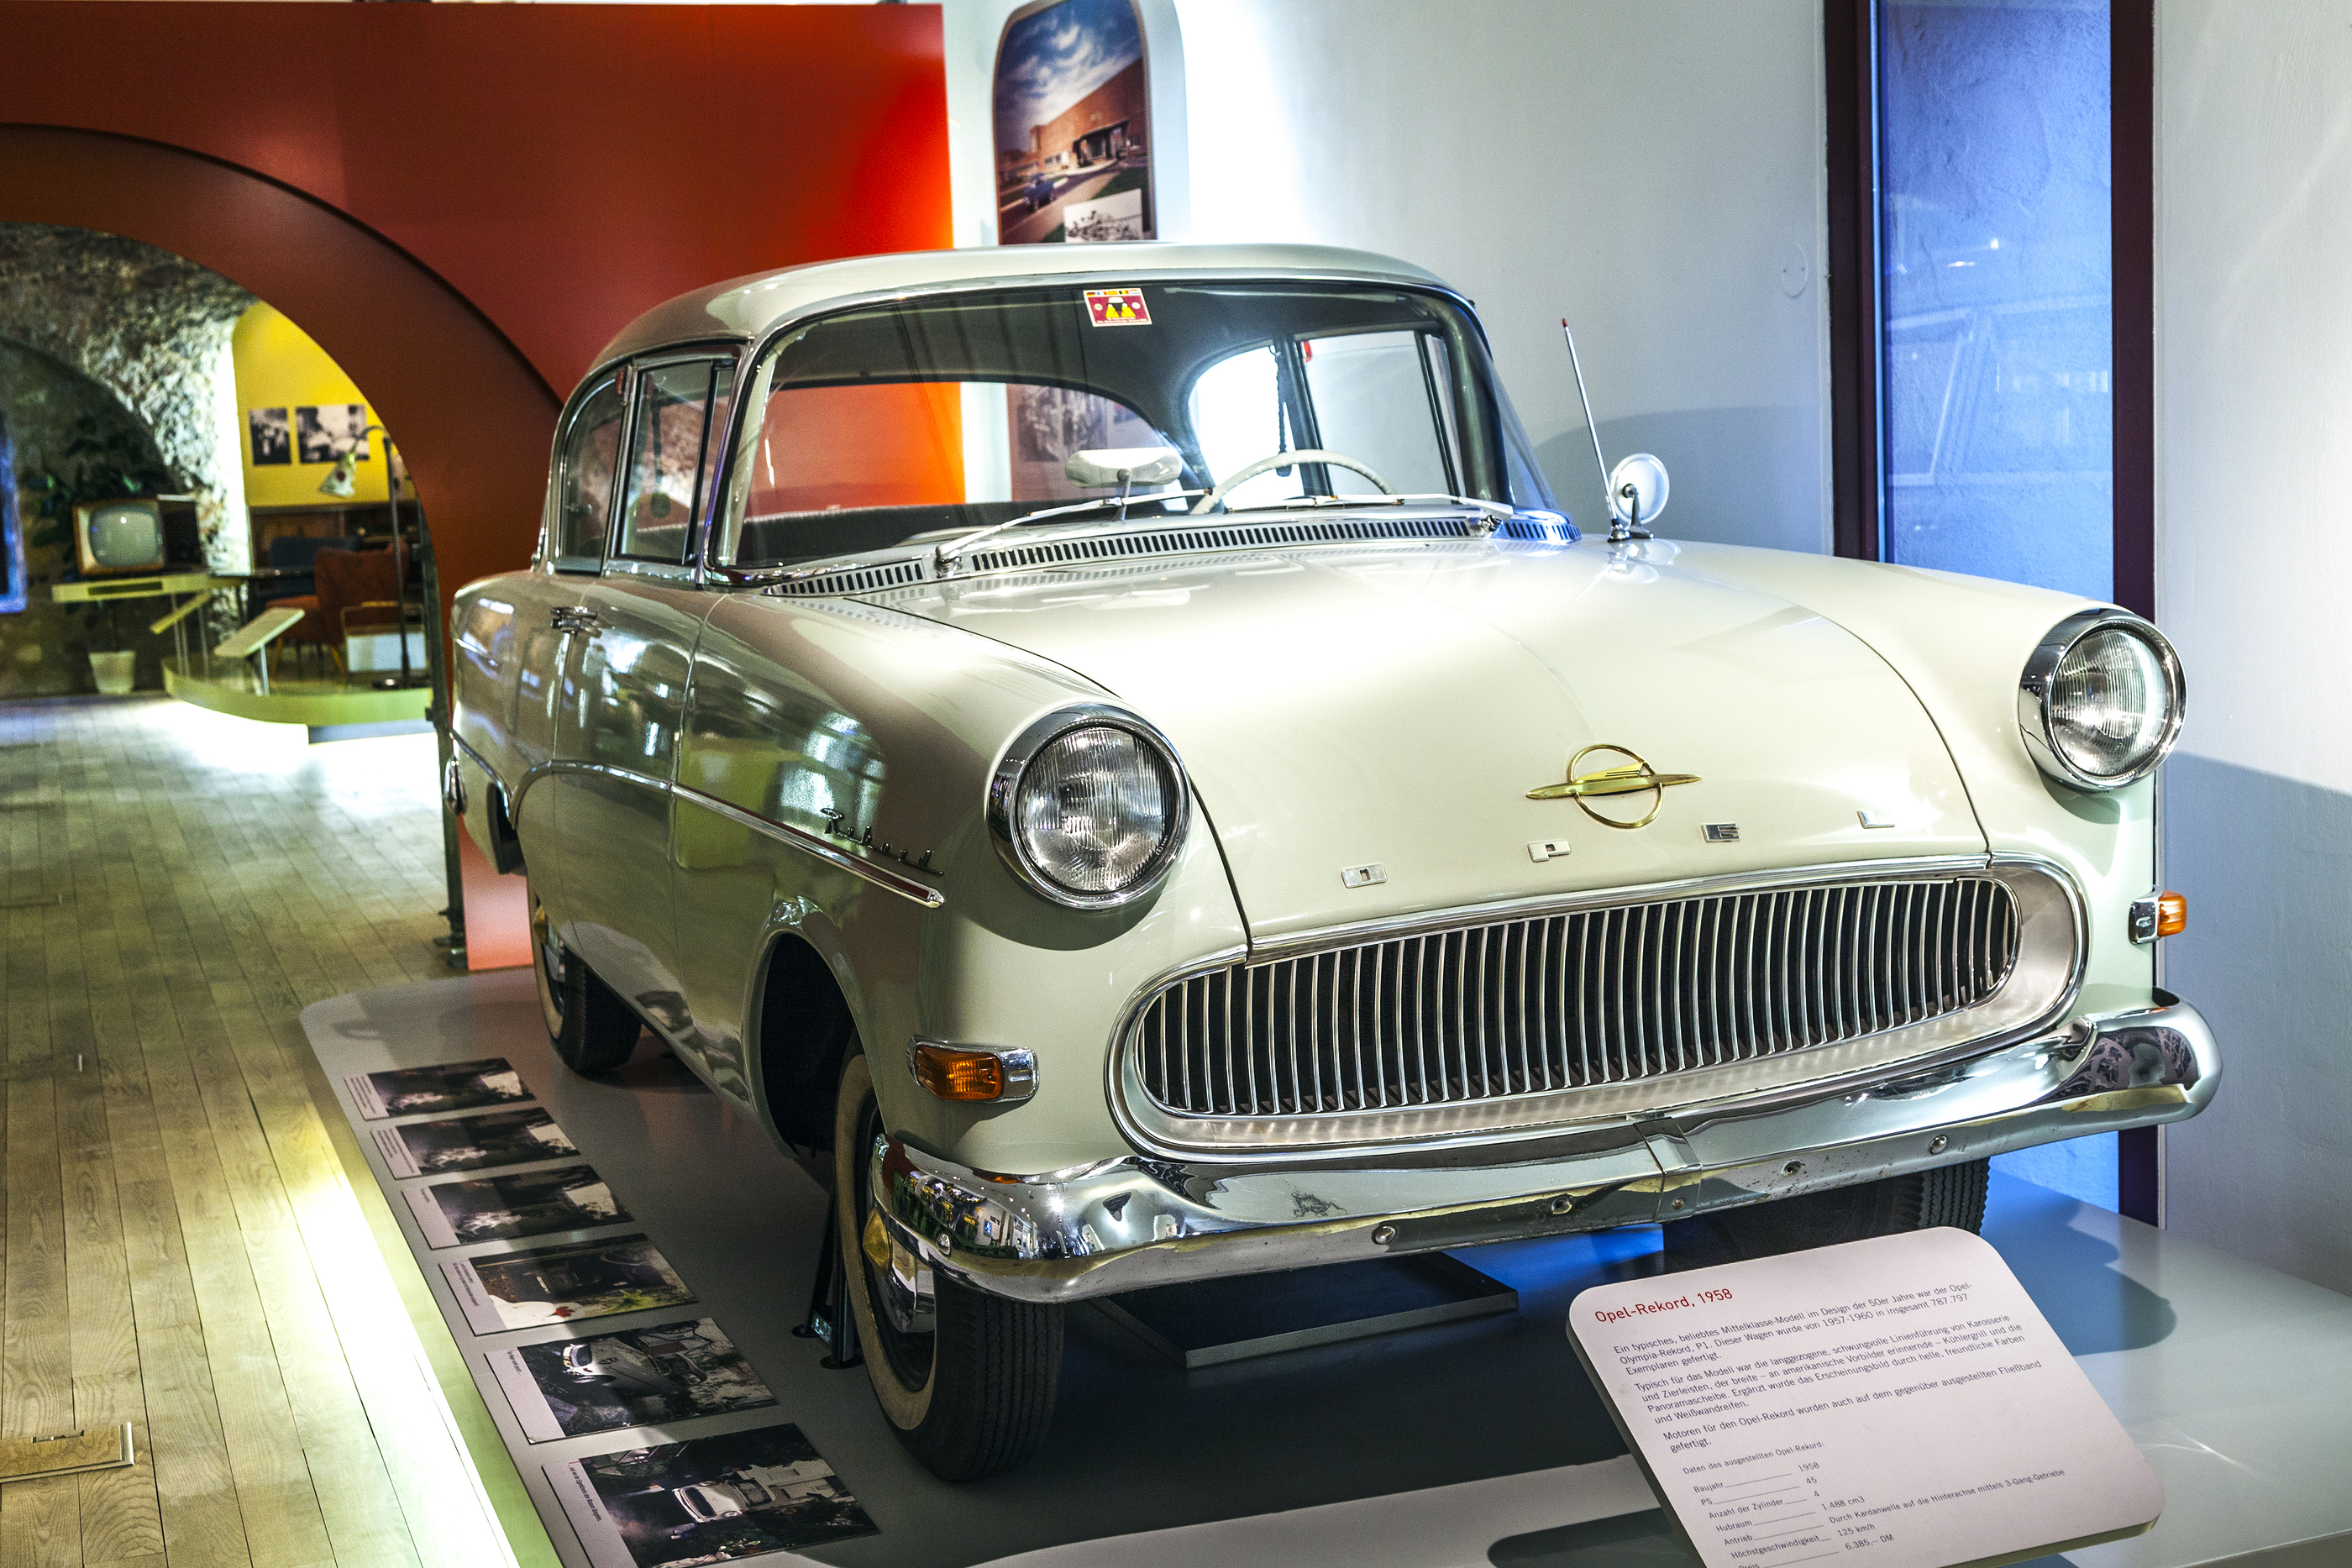 FAMOUS OPEL RECORD IN THE MUSEUM BY JORG HACKEMANN